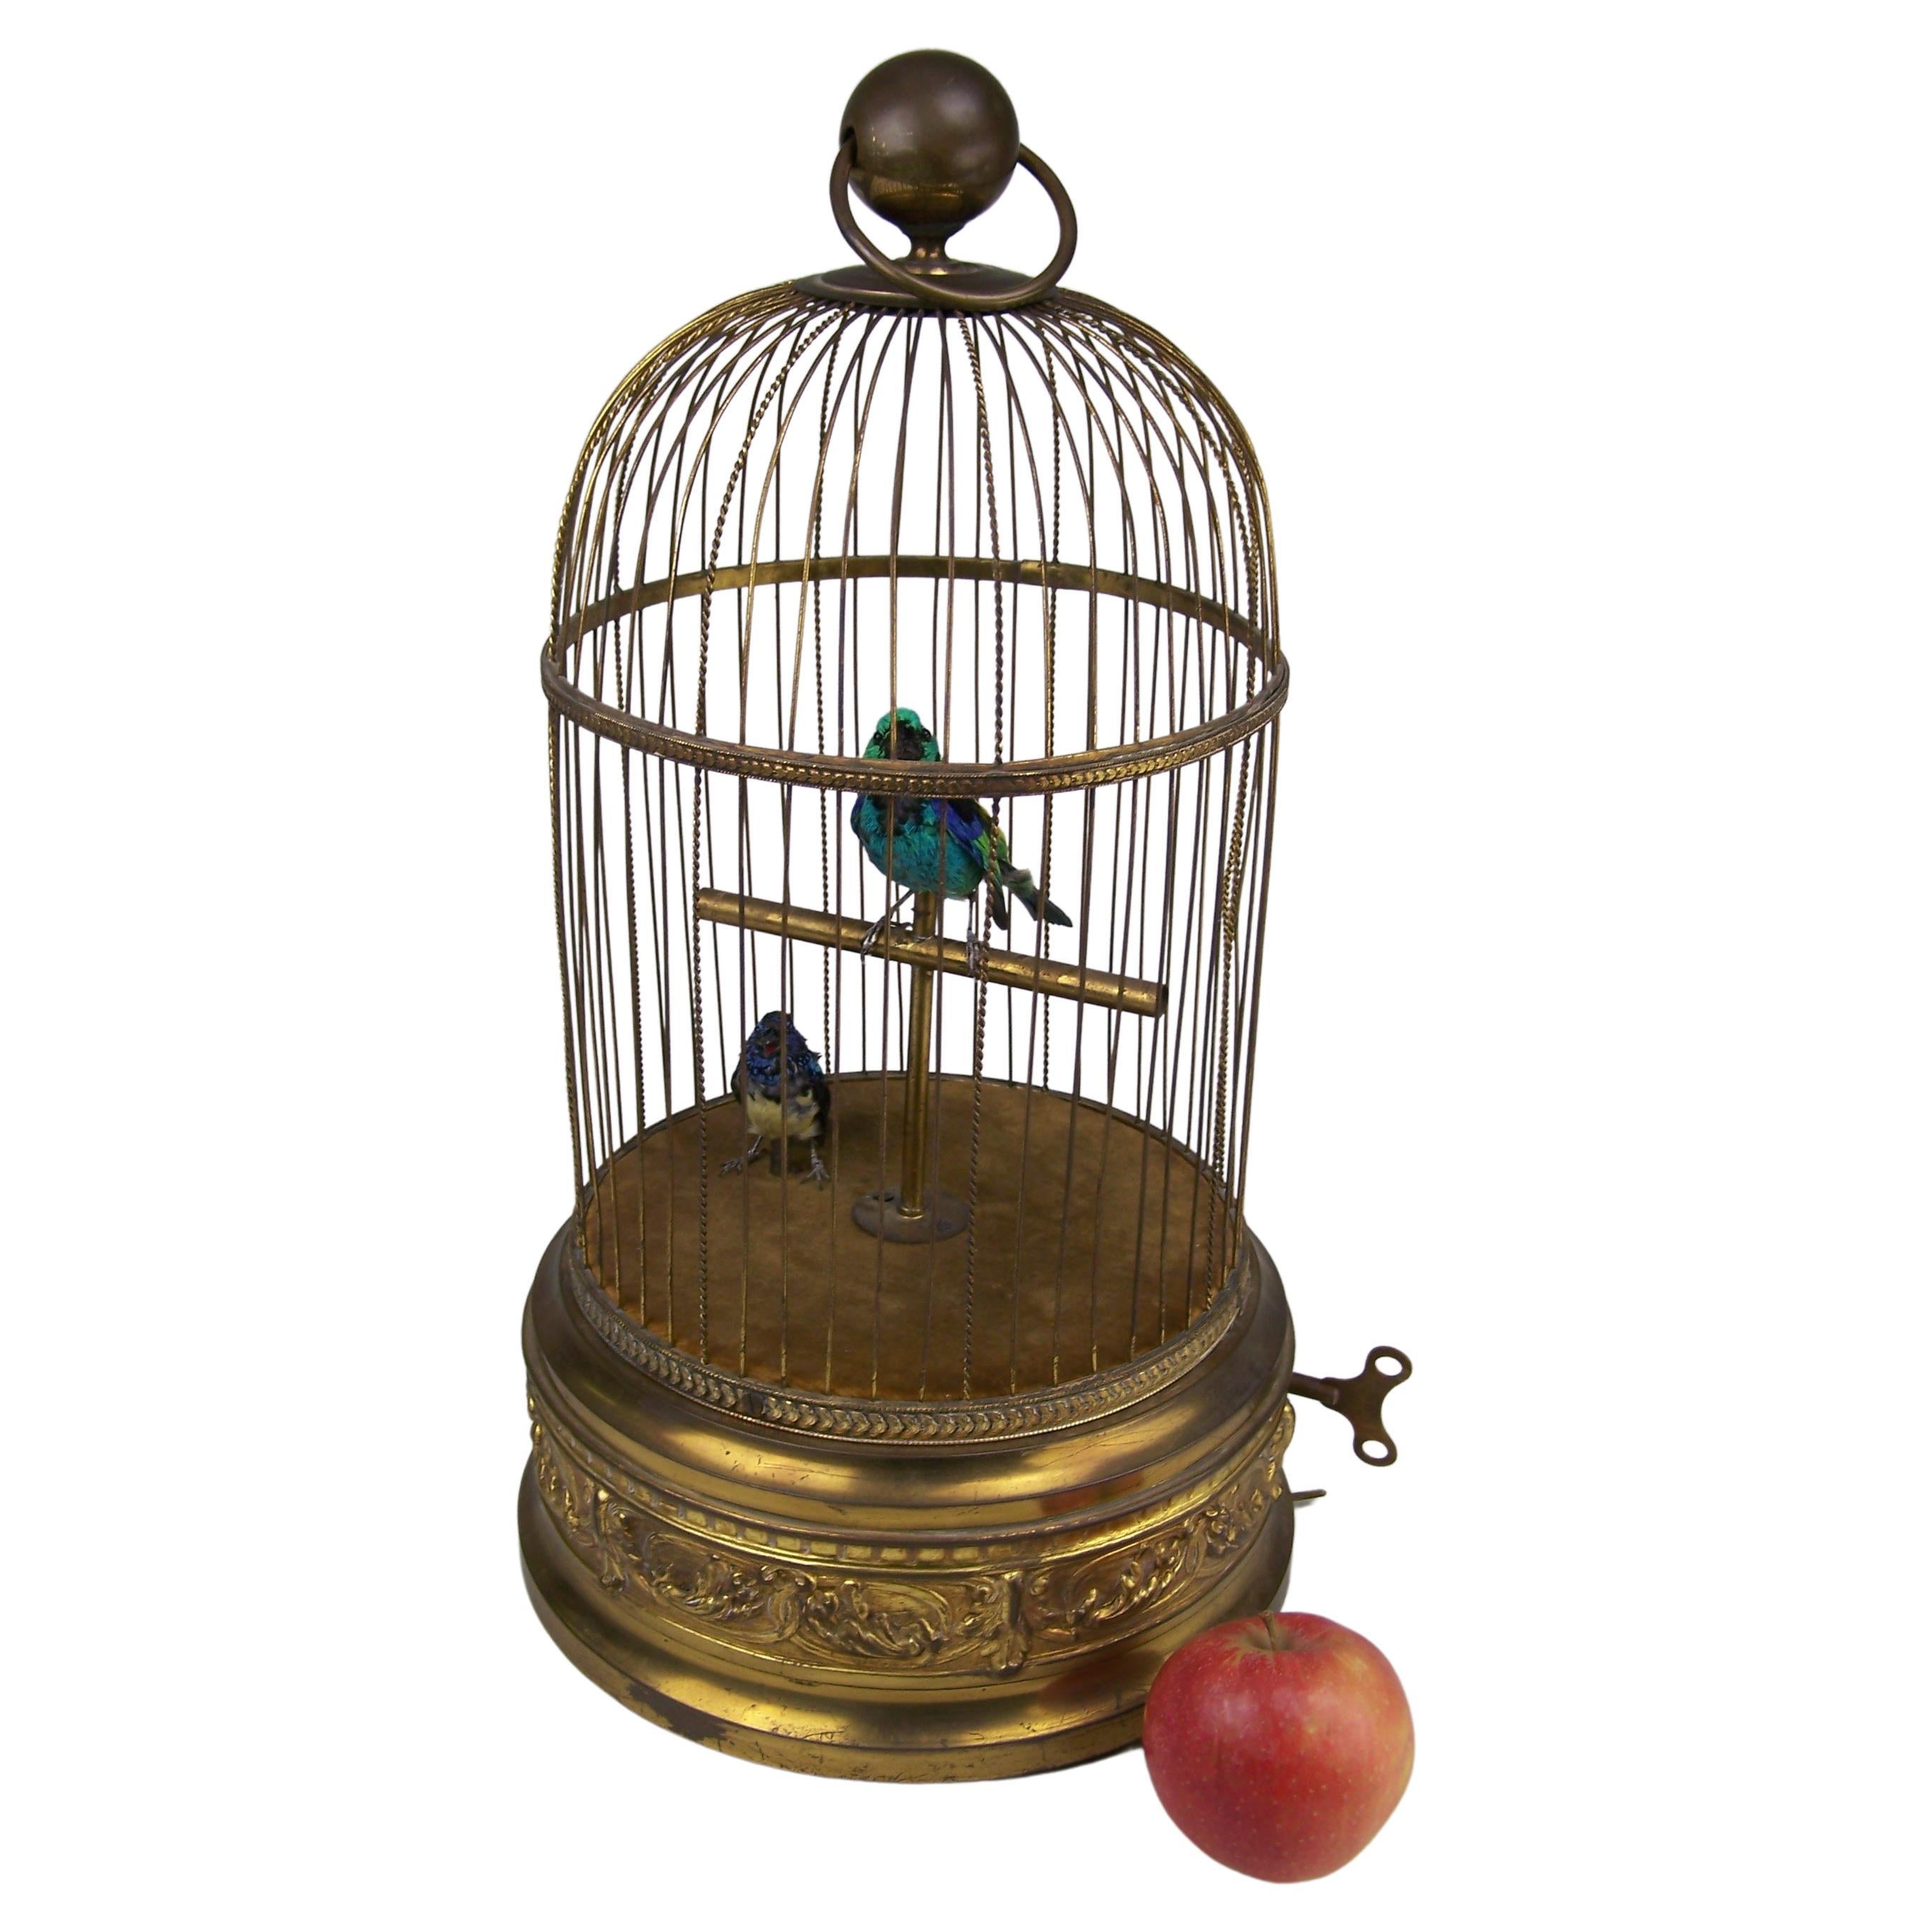 Singing Bird Cage by Bontems with 2 birds